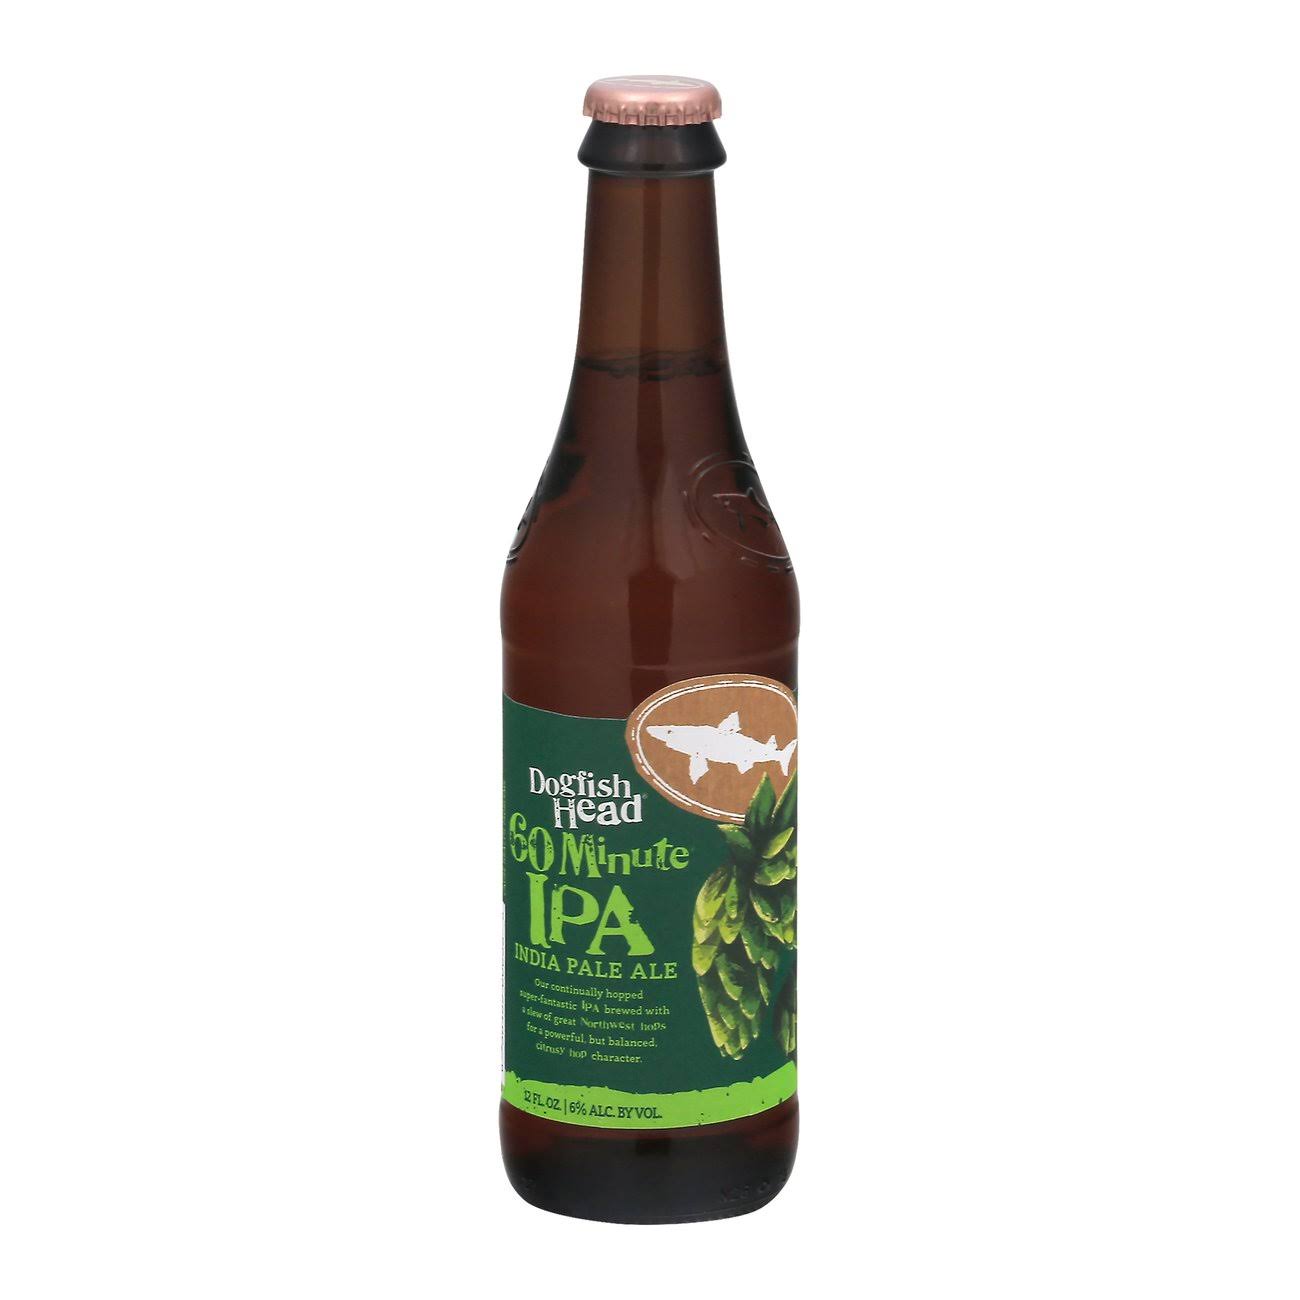 Dogfish Head Beer, India Pale Ale, 60 Minute - 12 fl oz